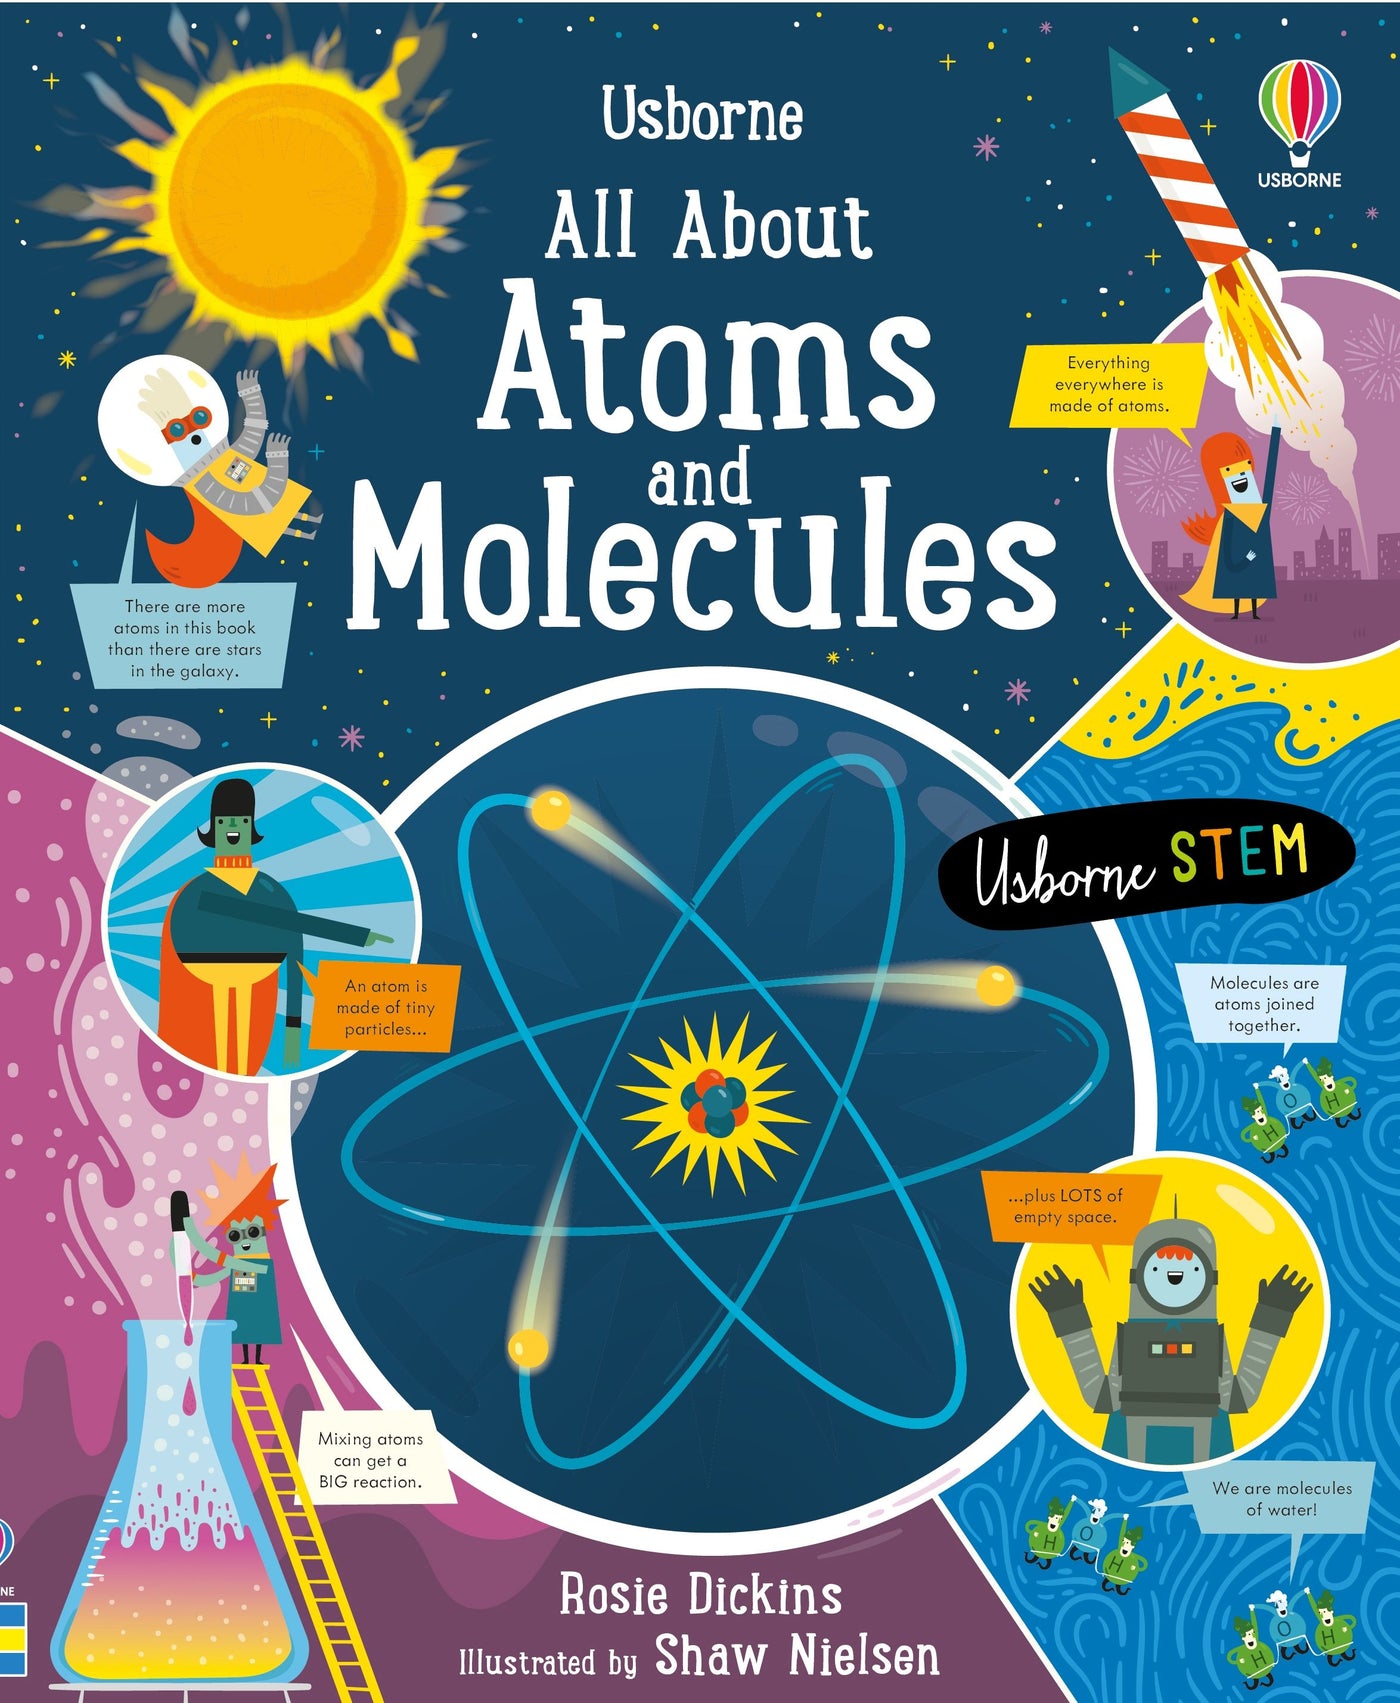 Atoms and Molecules: Book and Jigsaw - Paperback | Usborne